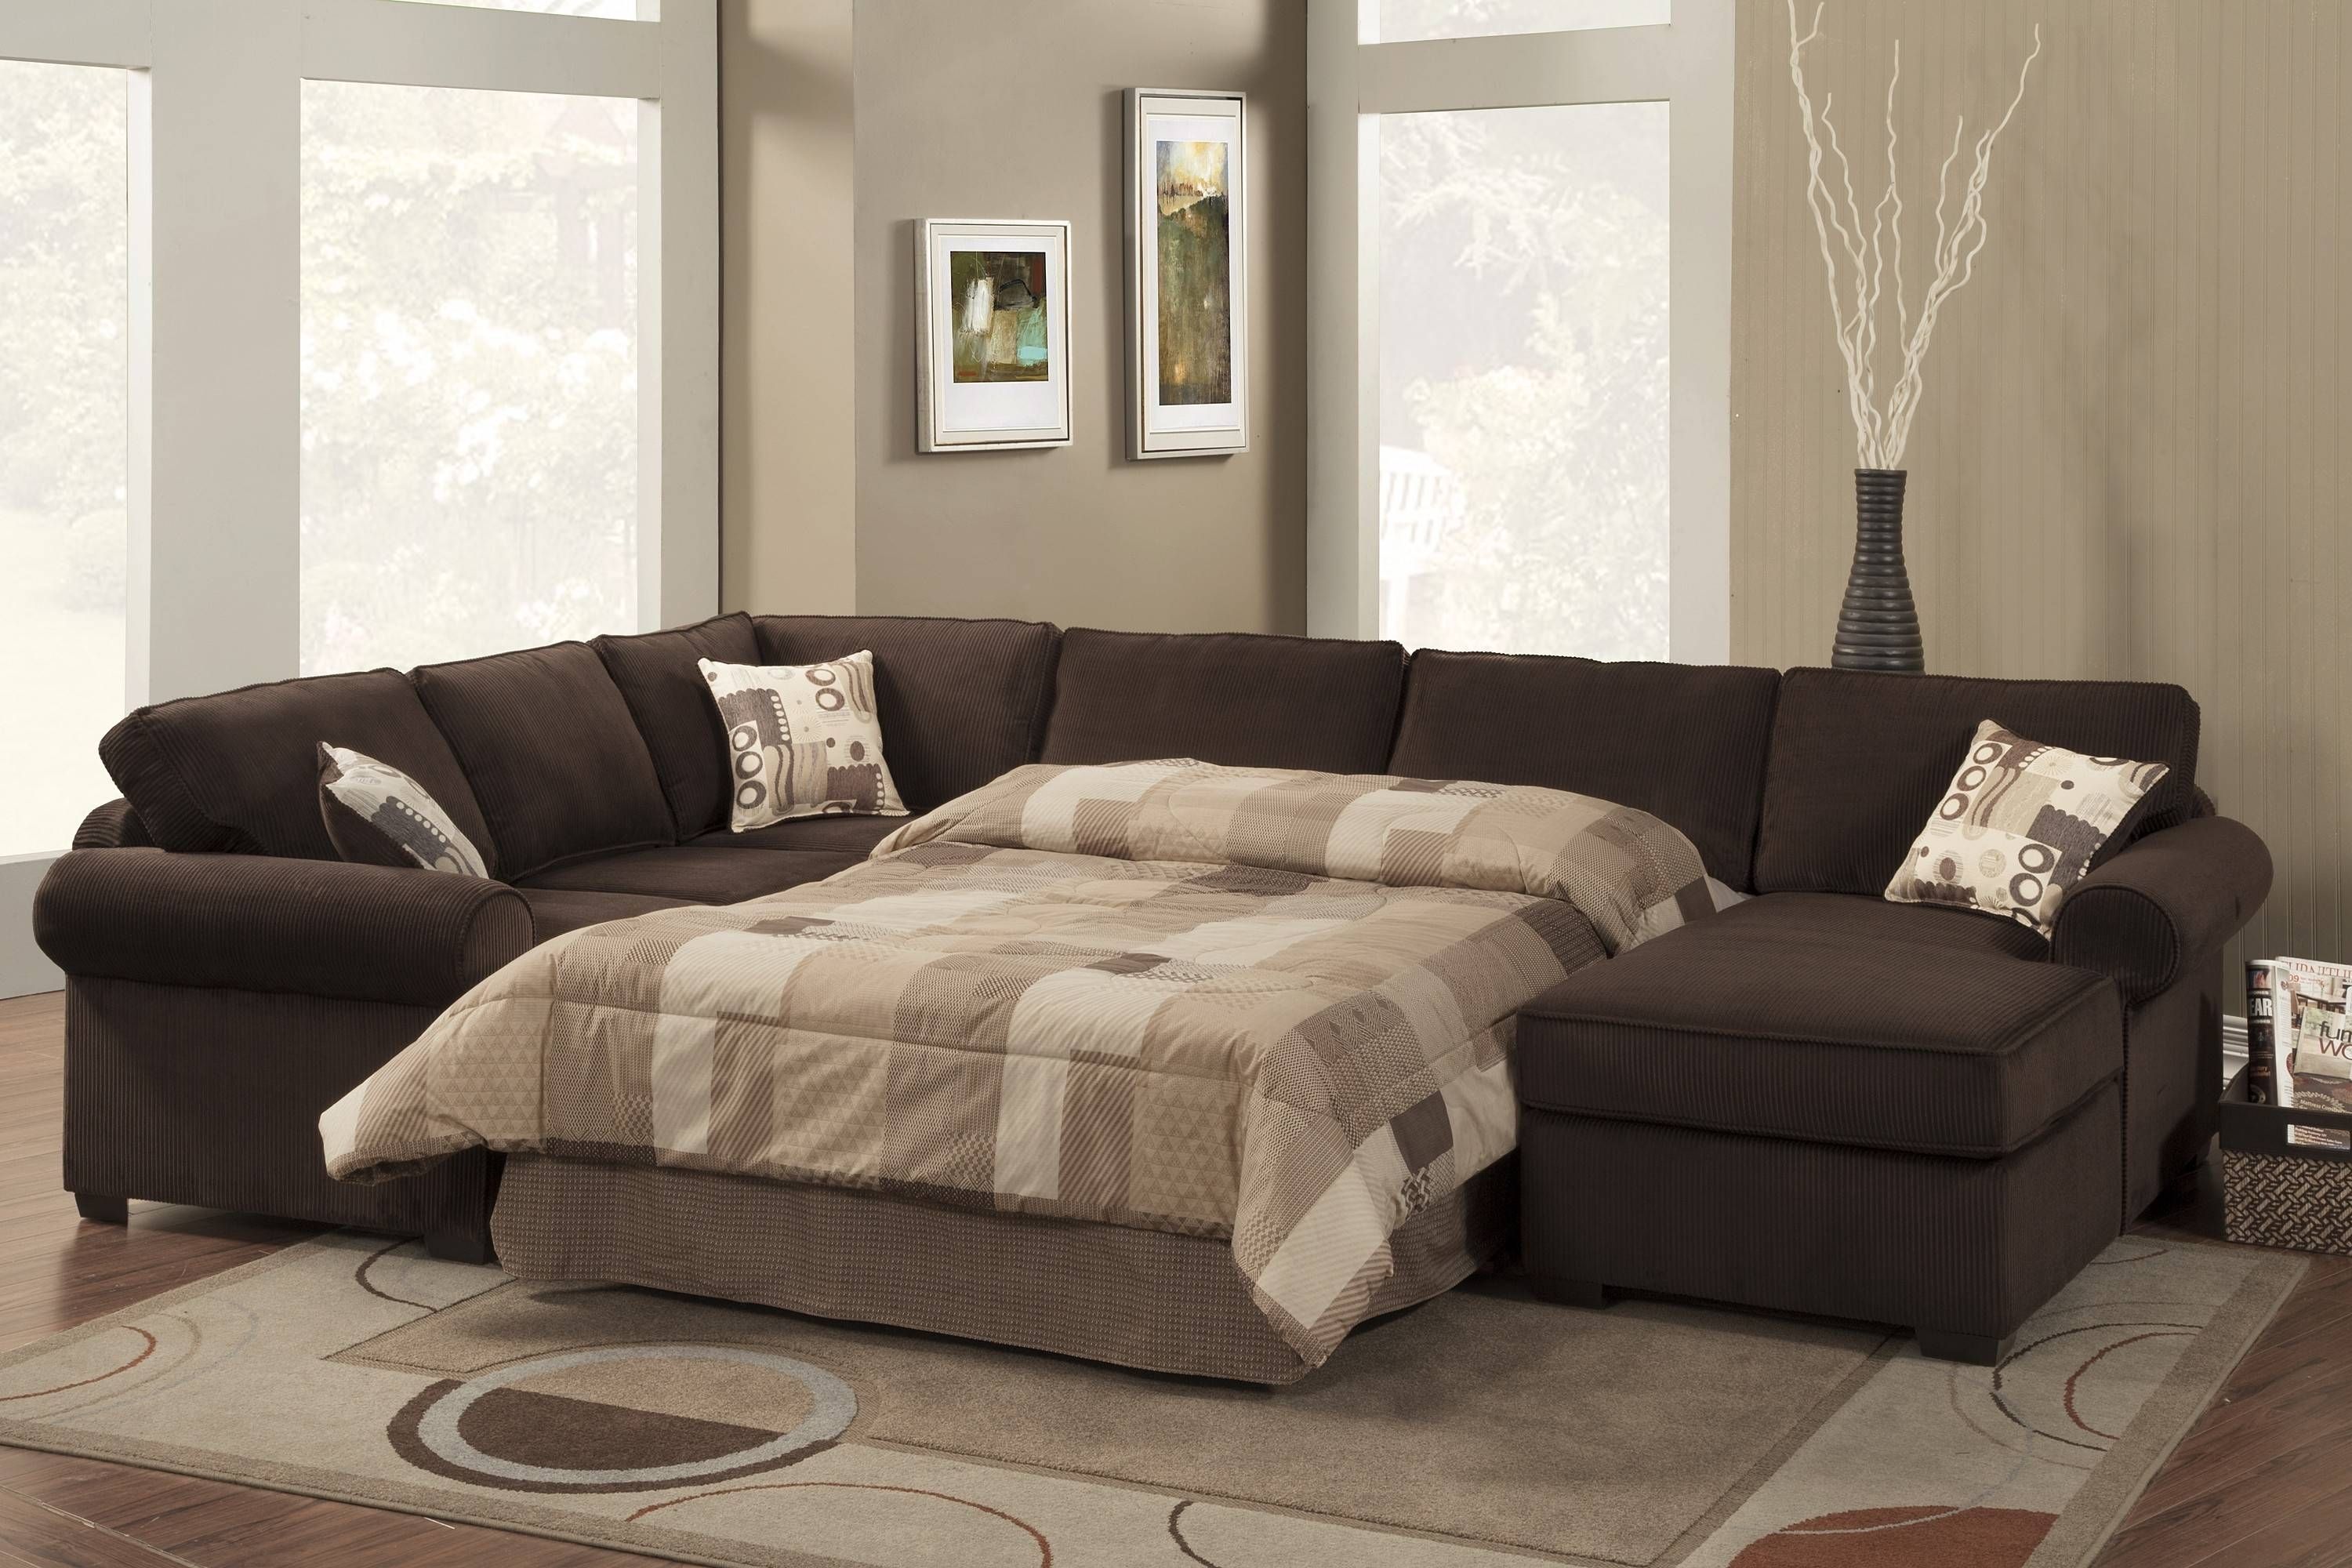 Sofa: Comfort And Style Is Evident In This Dynamic With Tufted Within Microsuede Sectional Sofas (View 27 of 30)